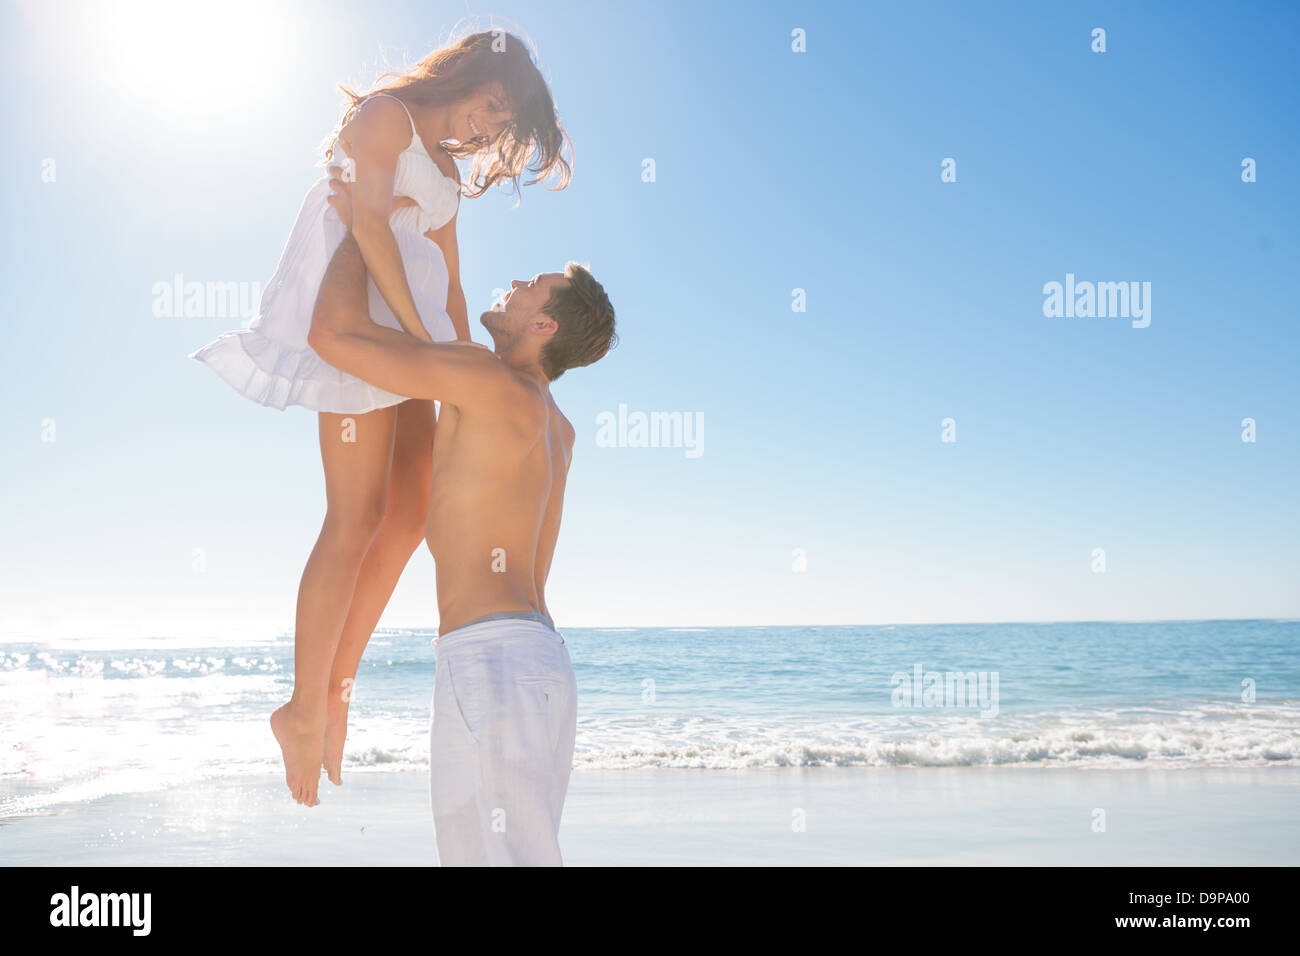 Handsome man holding his wife Stock Photo